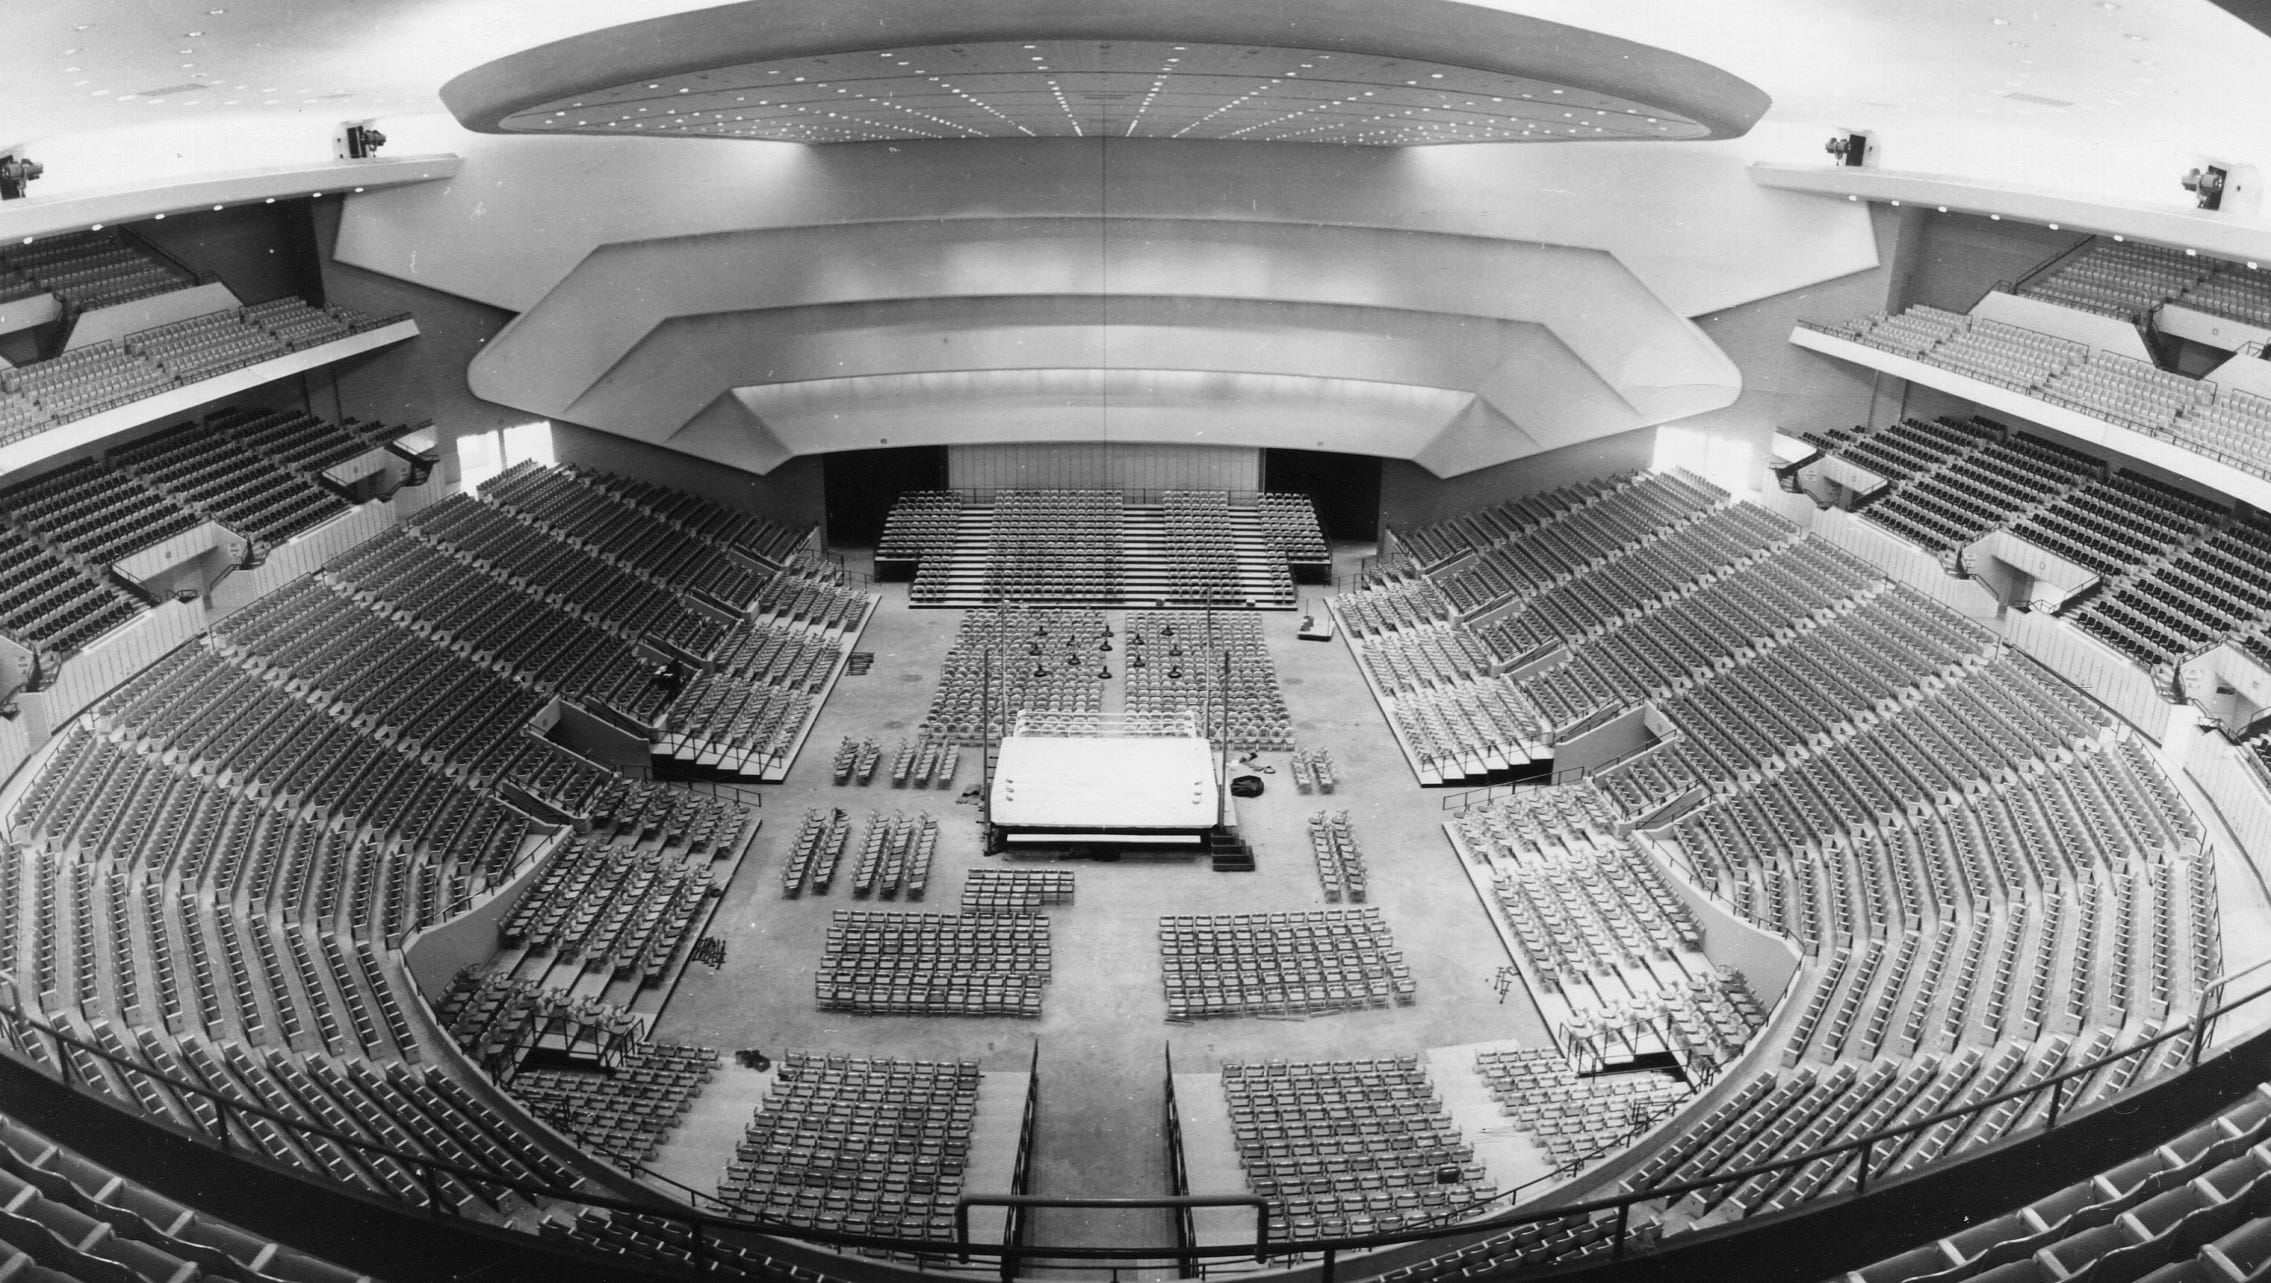 The interior of Cobo Arena is shown on June 25, 1963.